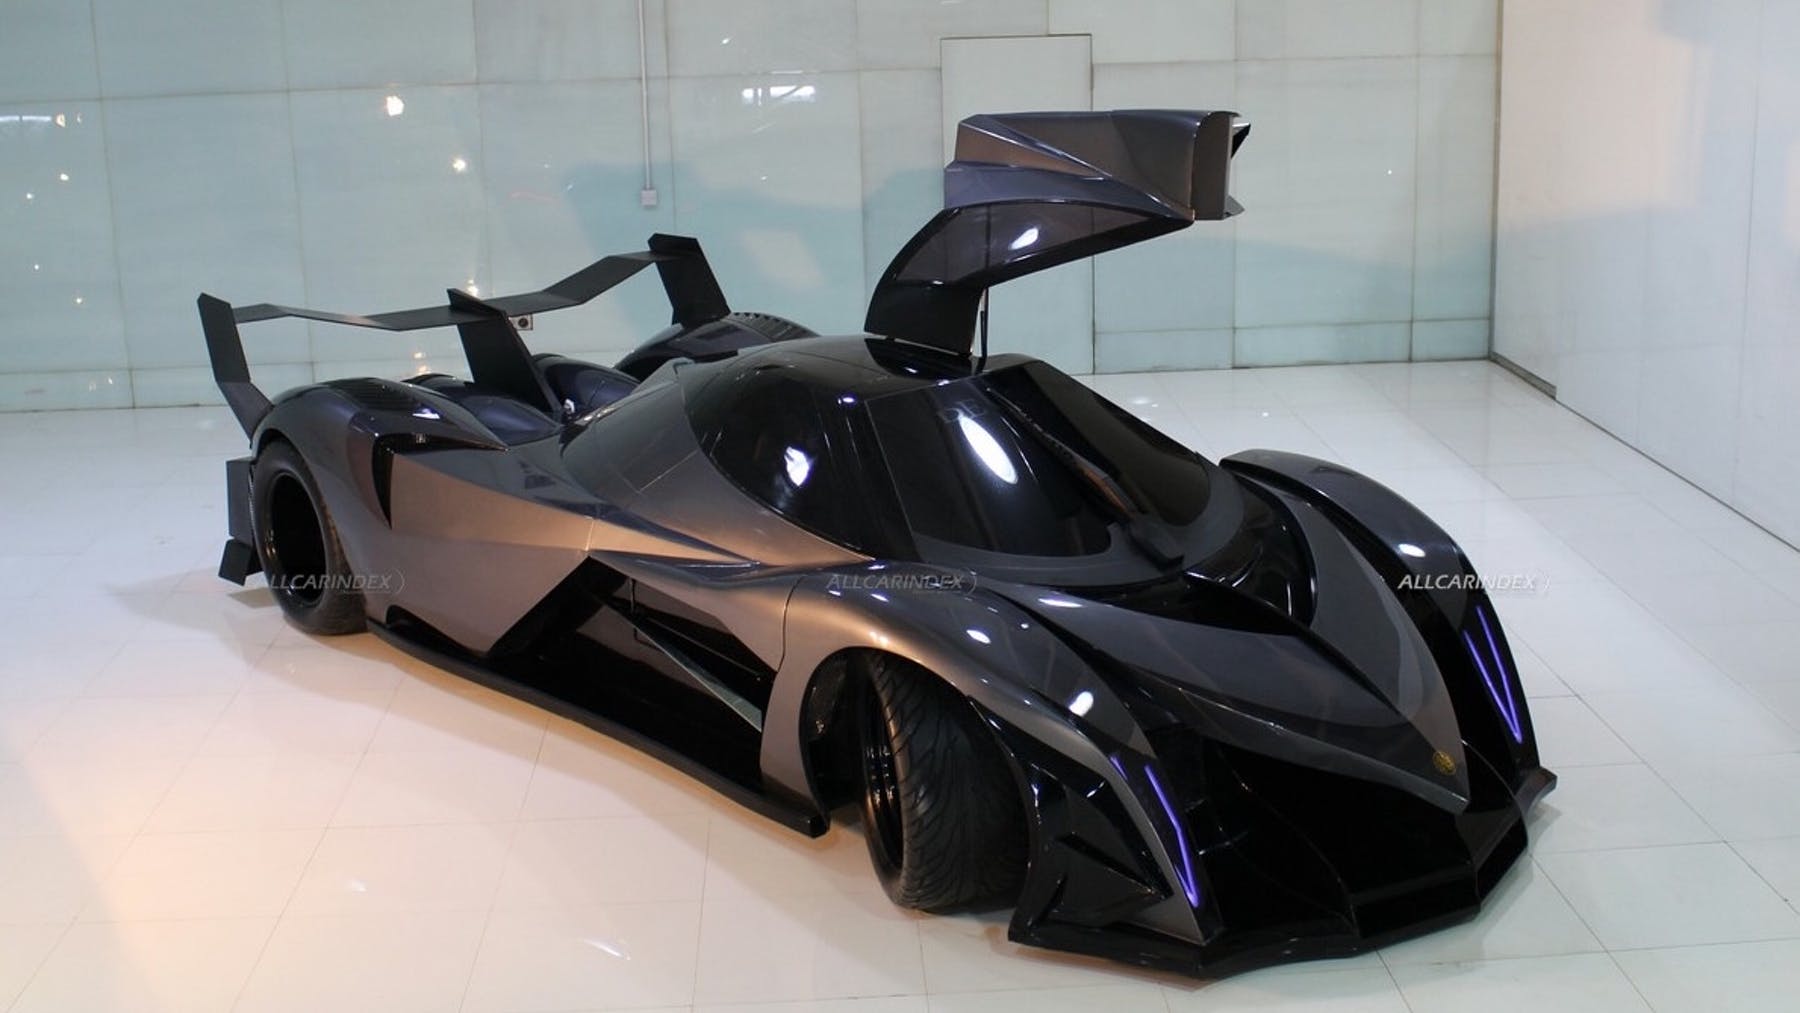 The 5000 Hp, 300 Mph Jet Like Devel Sixteen Is Finally Here!. Cars